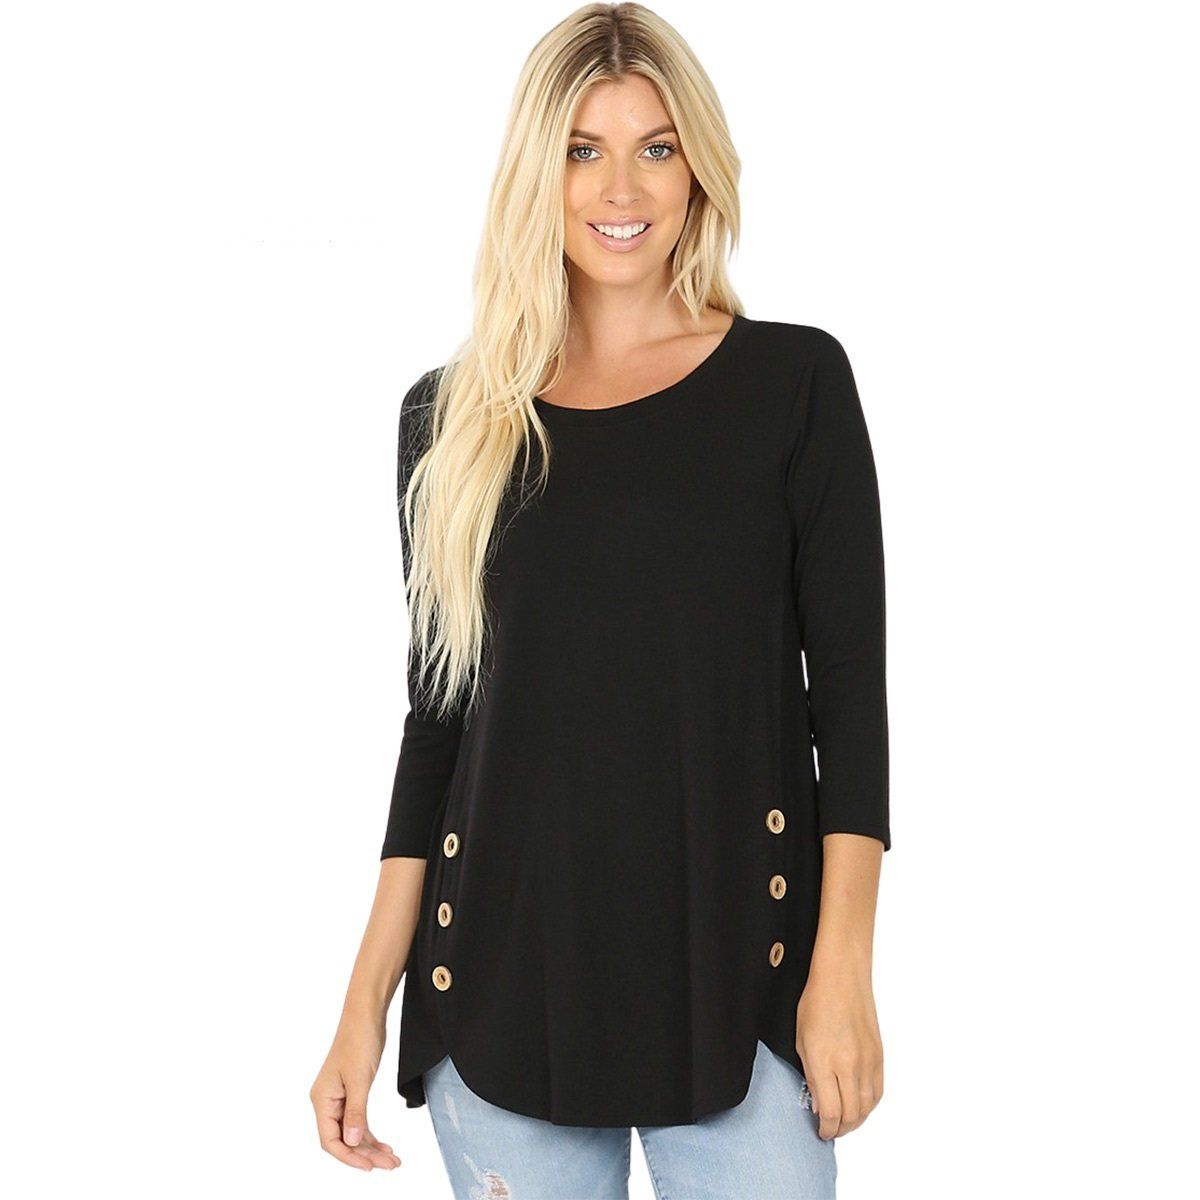 Womens 3/4 Sleeve, Side Button, Dolphin Hem Tunic Top: Black Tops MomMe and More 